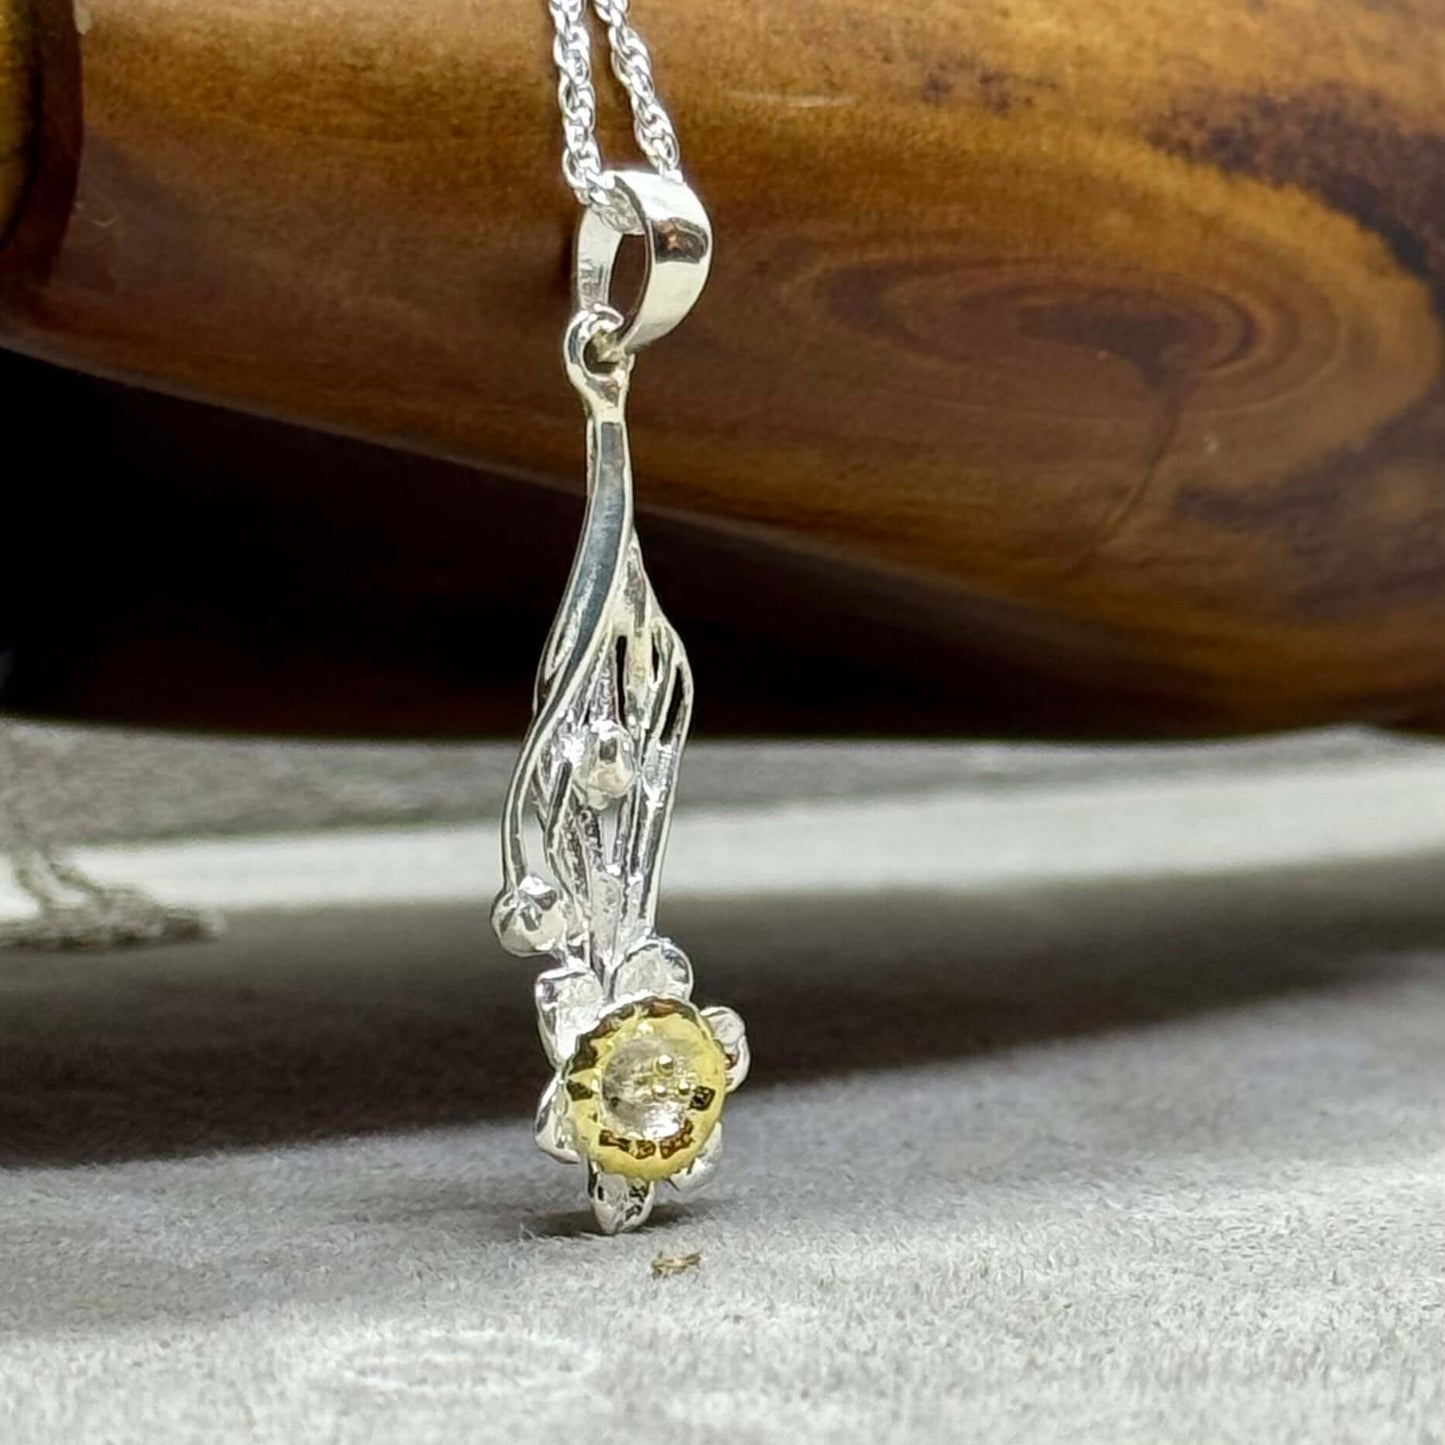 Daffodil Flower Pendant in Sterling Silver With 18 Carat Gold - Twelve Silver Trees